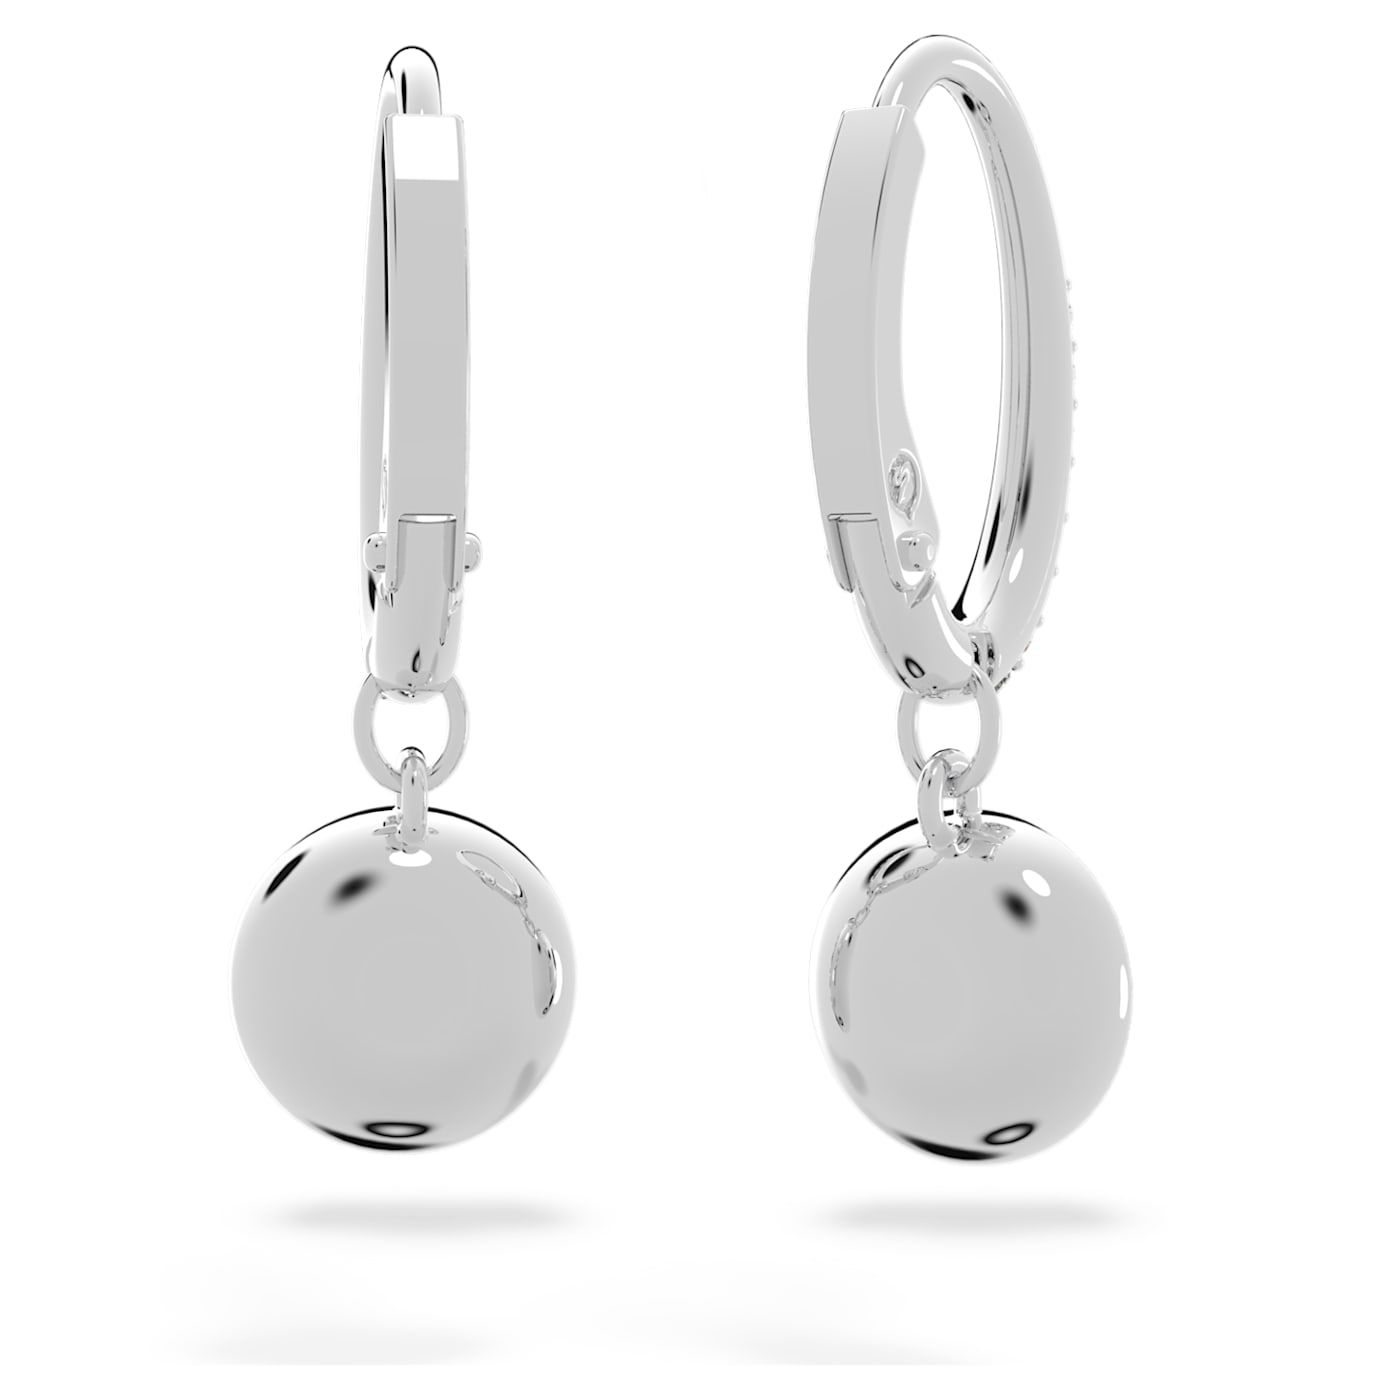 Angelic Pierced Earrings, White, Rhodium plated - The Crystal Fish Gifts